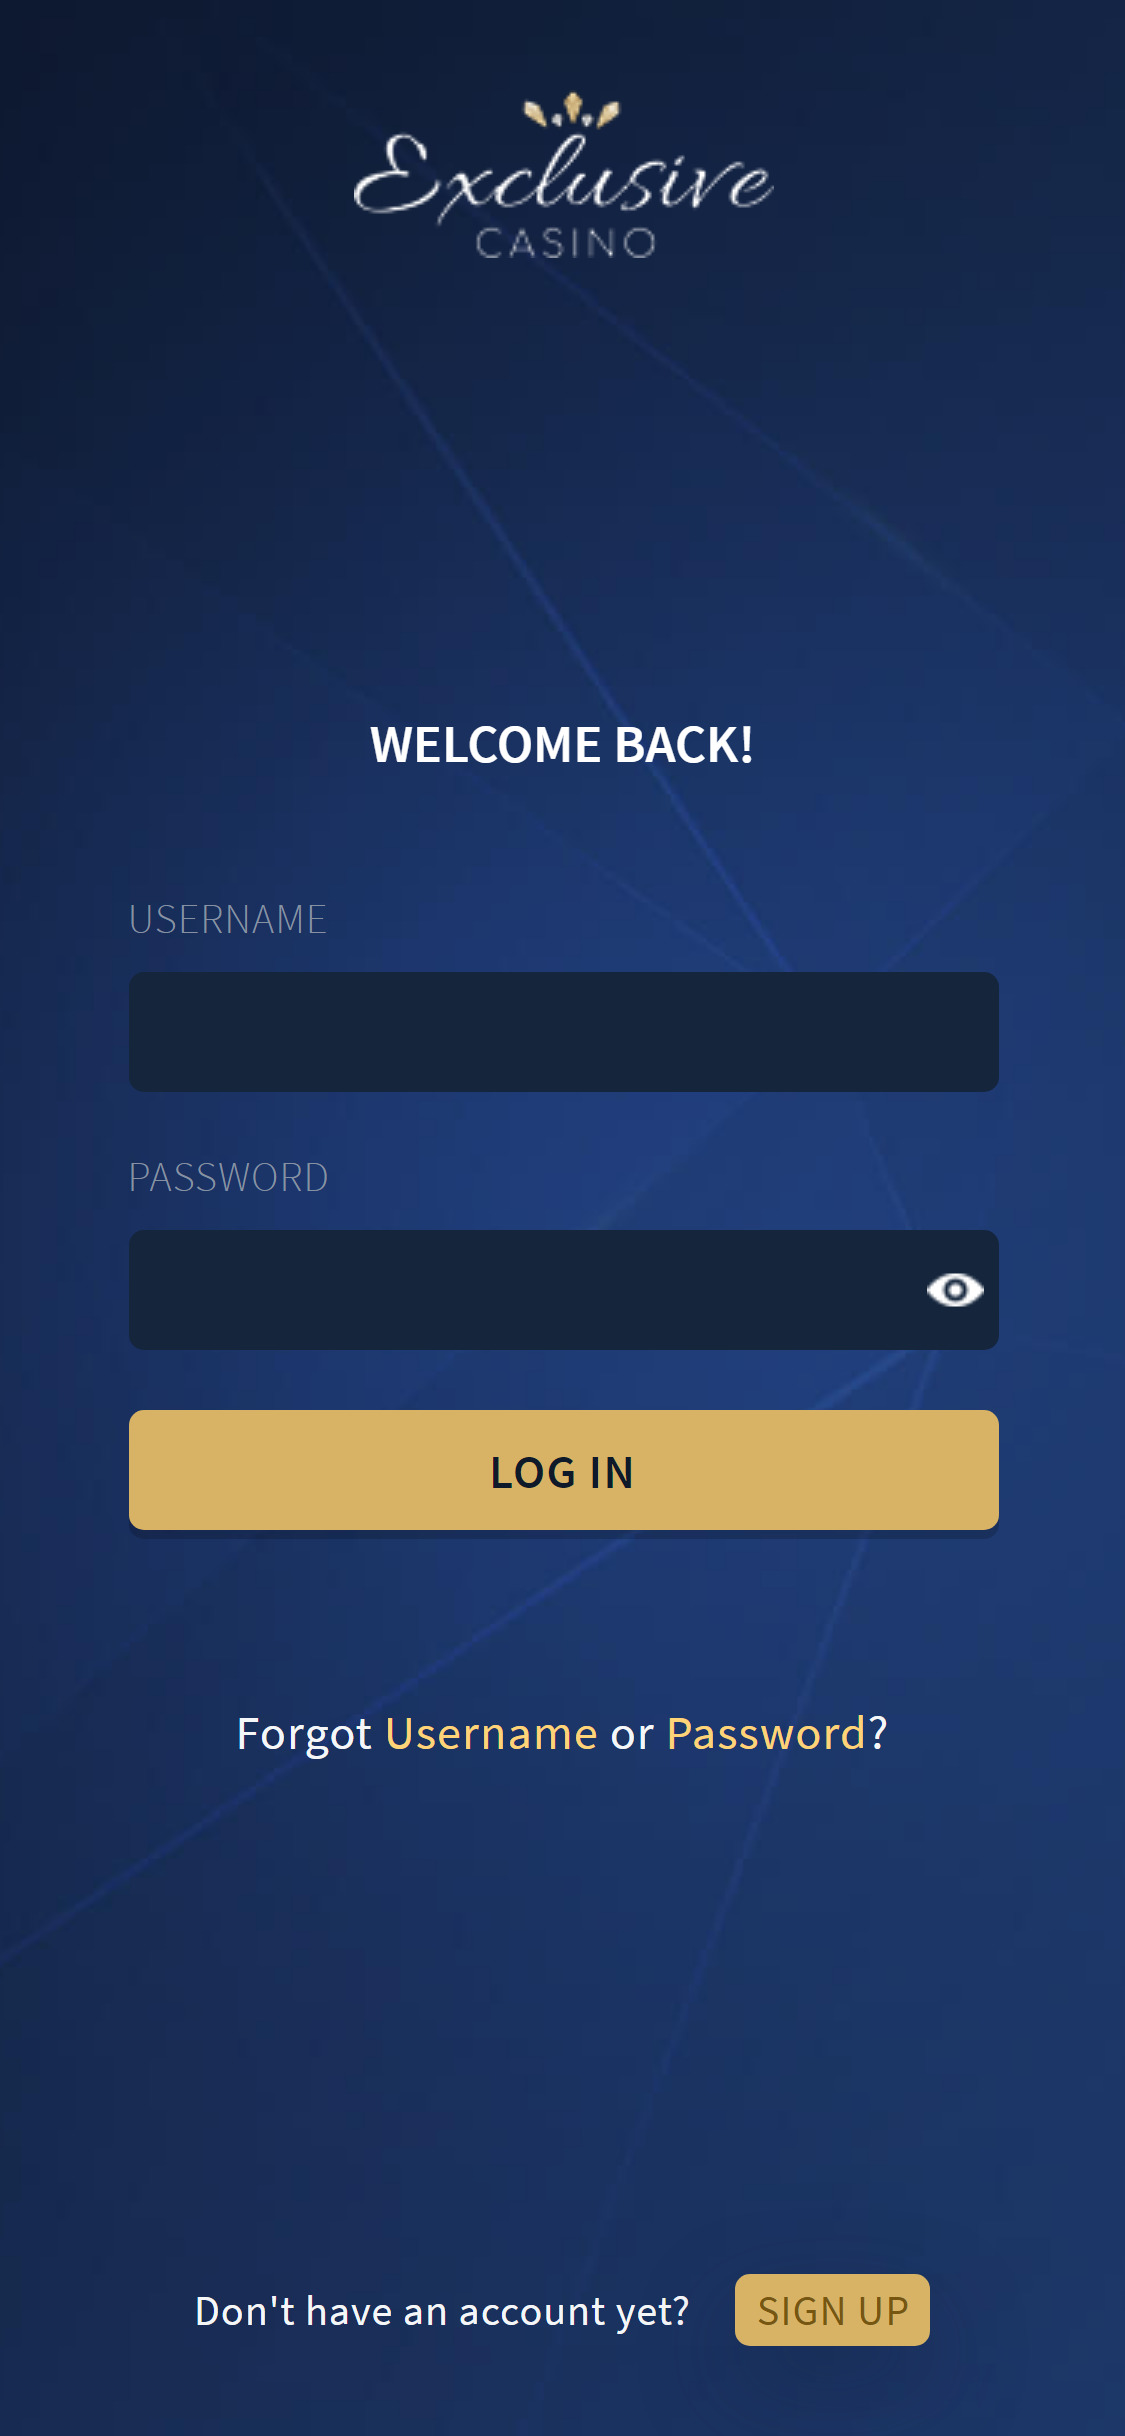 Exclusive Casino Mobile Login Review